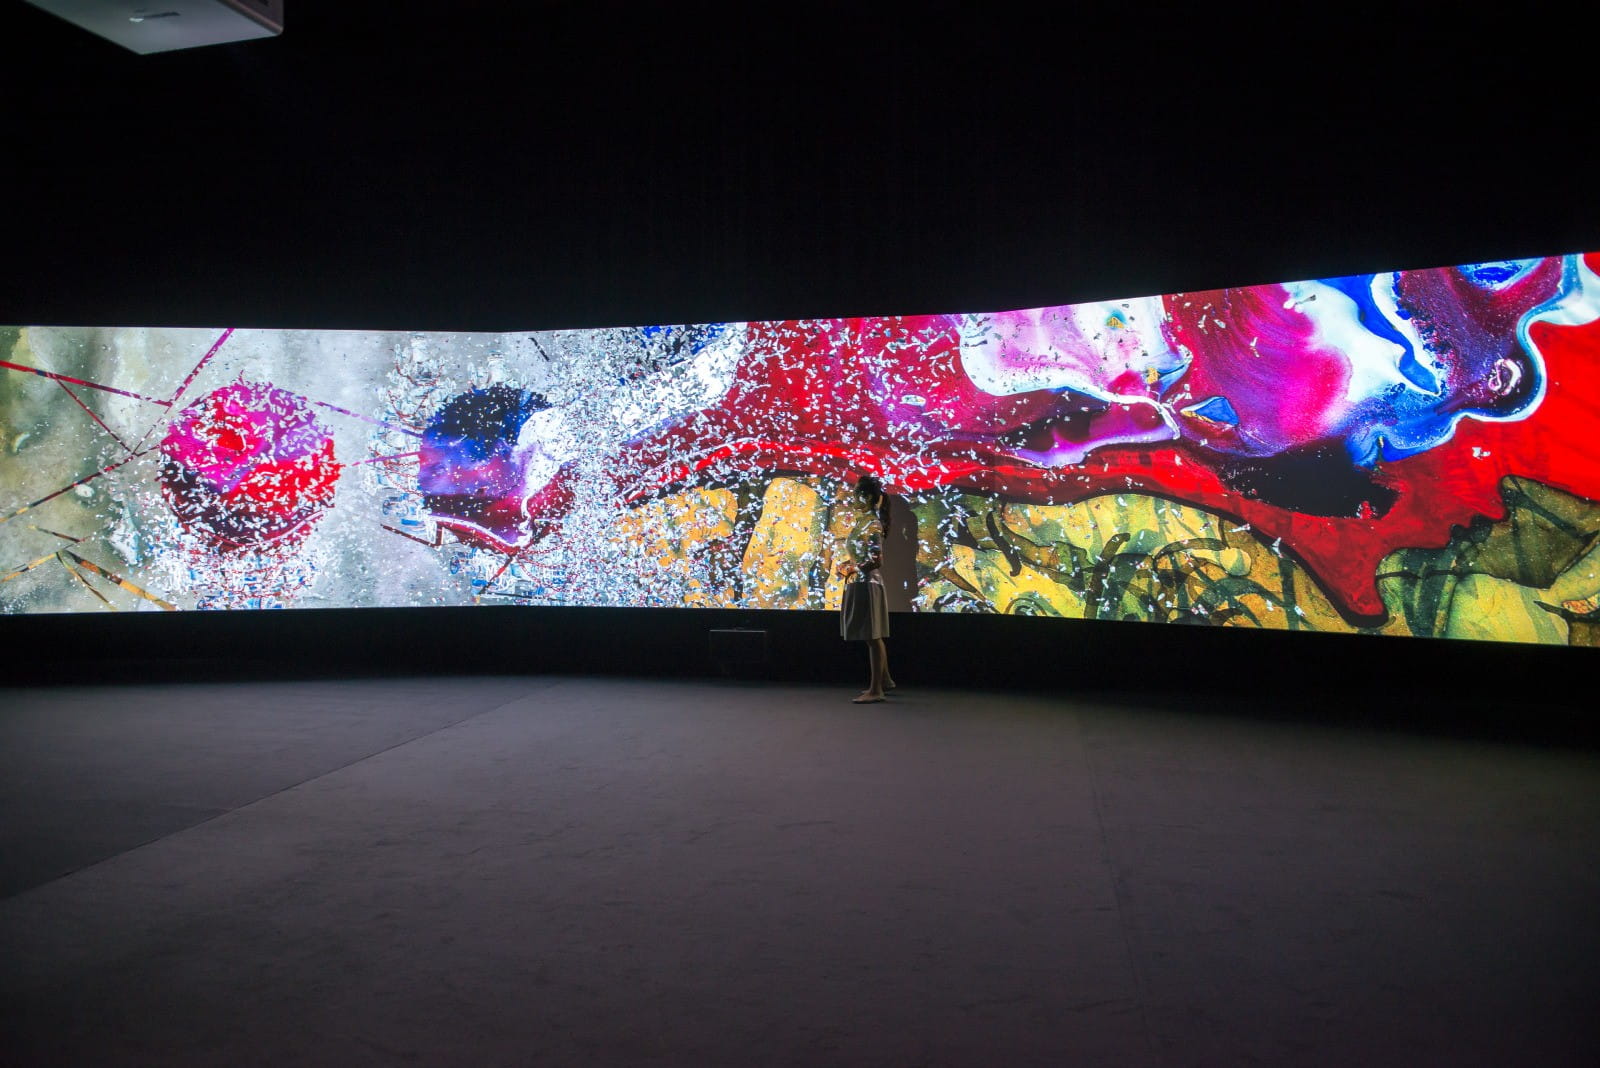 Shahzia Sikander, Parallax, 2013. Three-channel, single-image HD video animation, with 5.1 surround sound. 15 minutes, 26 seconds, music by Du Yun. Shahzia Sikander, Parallax, installation view, Guggenheim Museum, Bilbao, Spain, 2015. © 2021 Shahzia Sikander. Courtesy: the artist and Sean Kelly, New York.